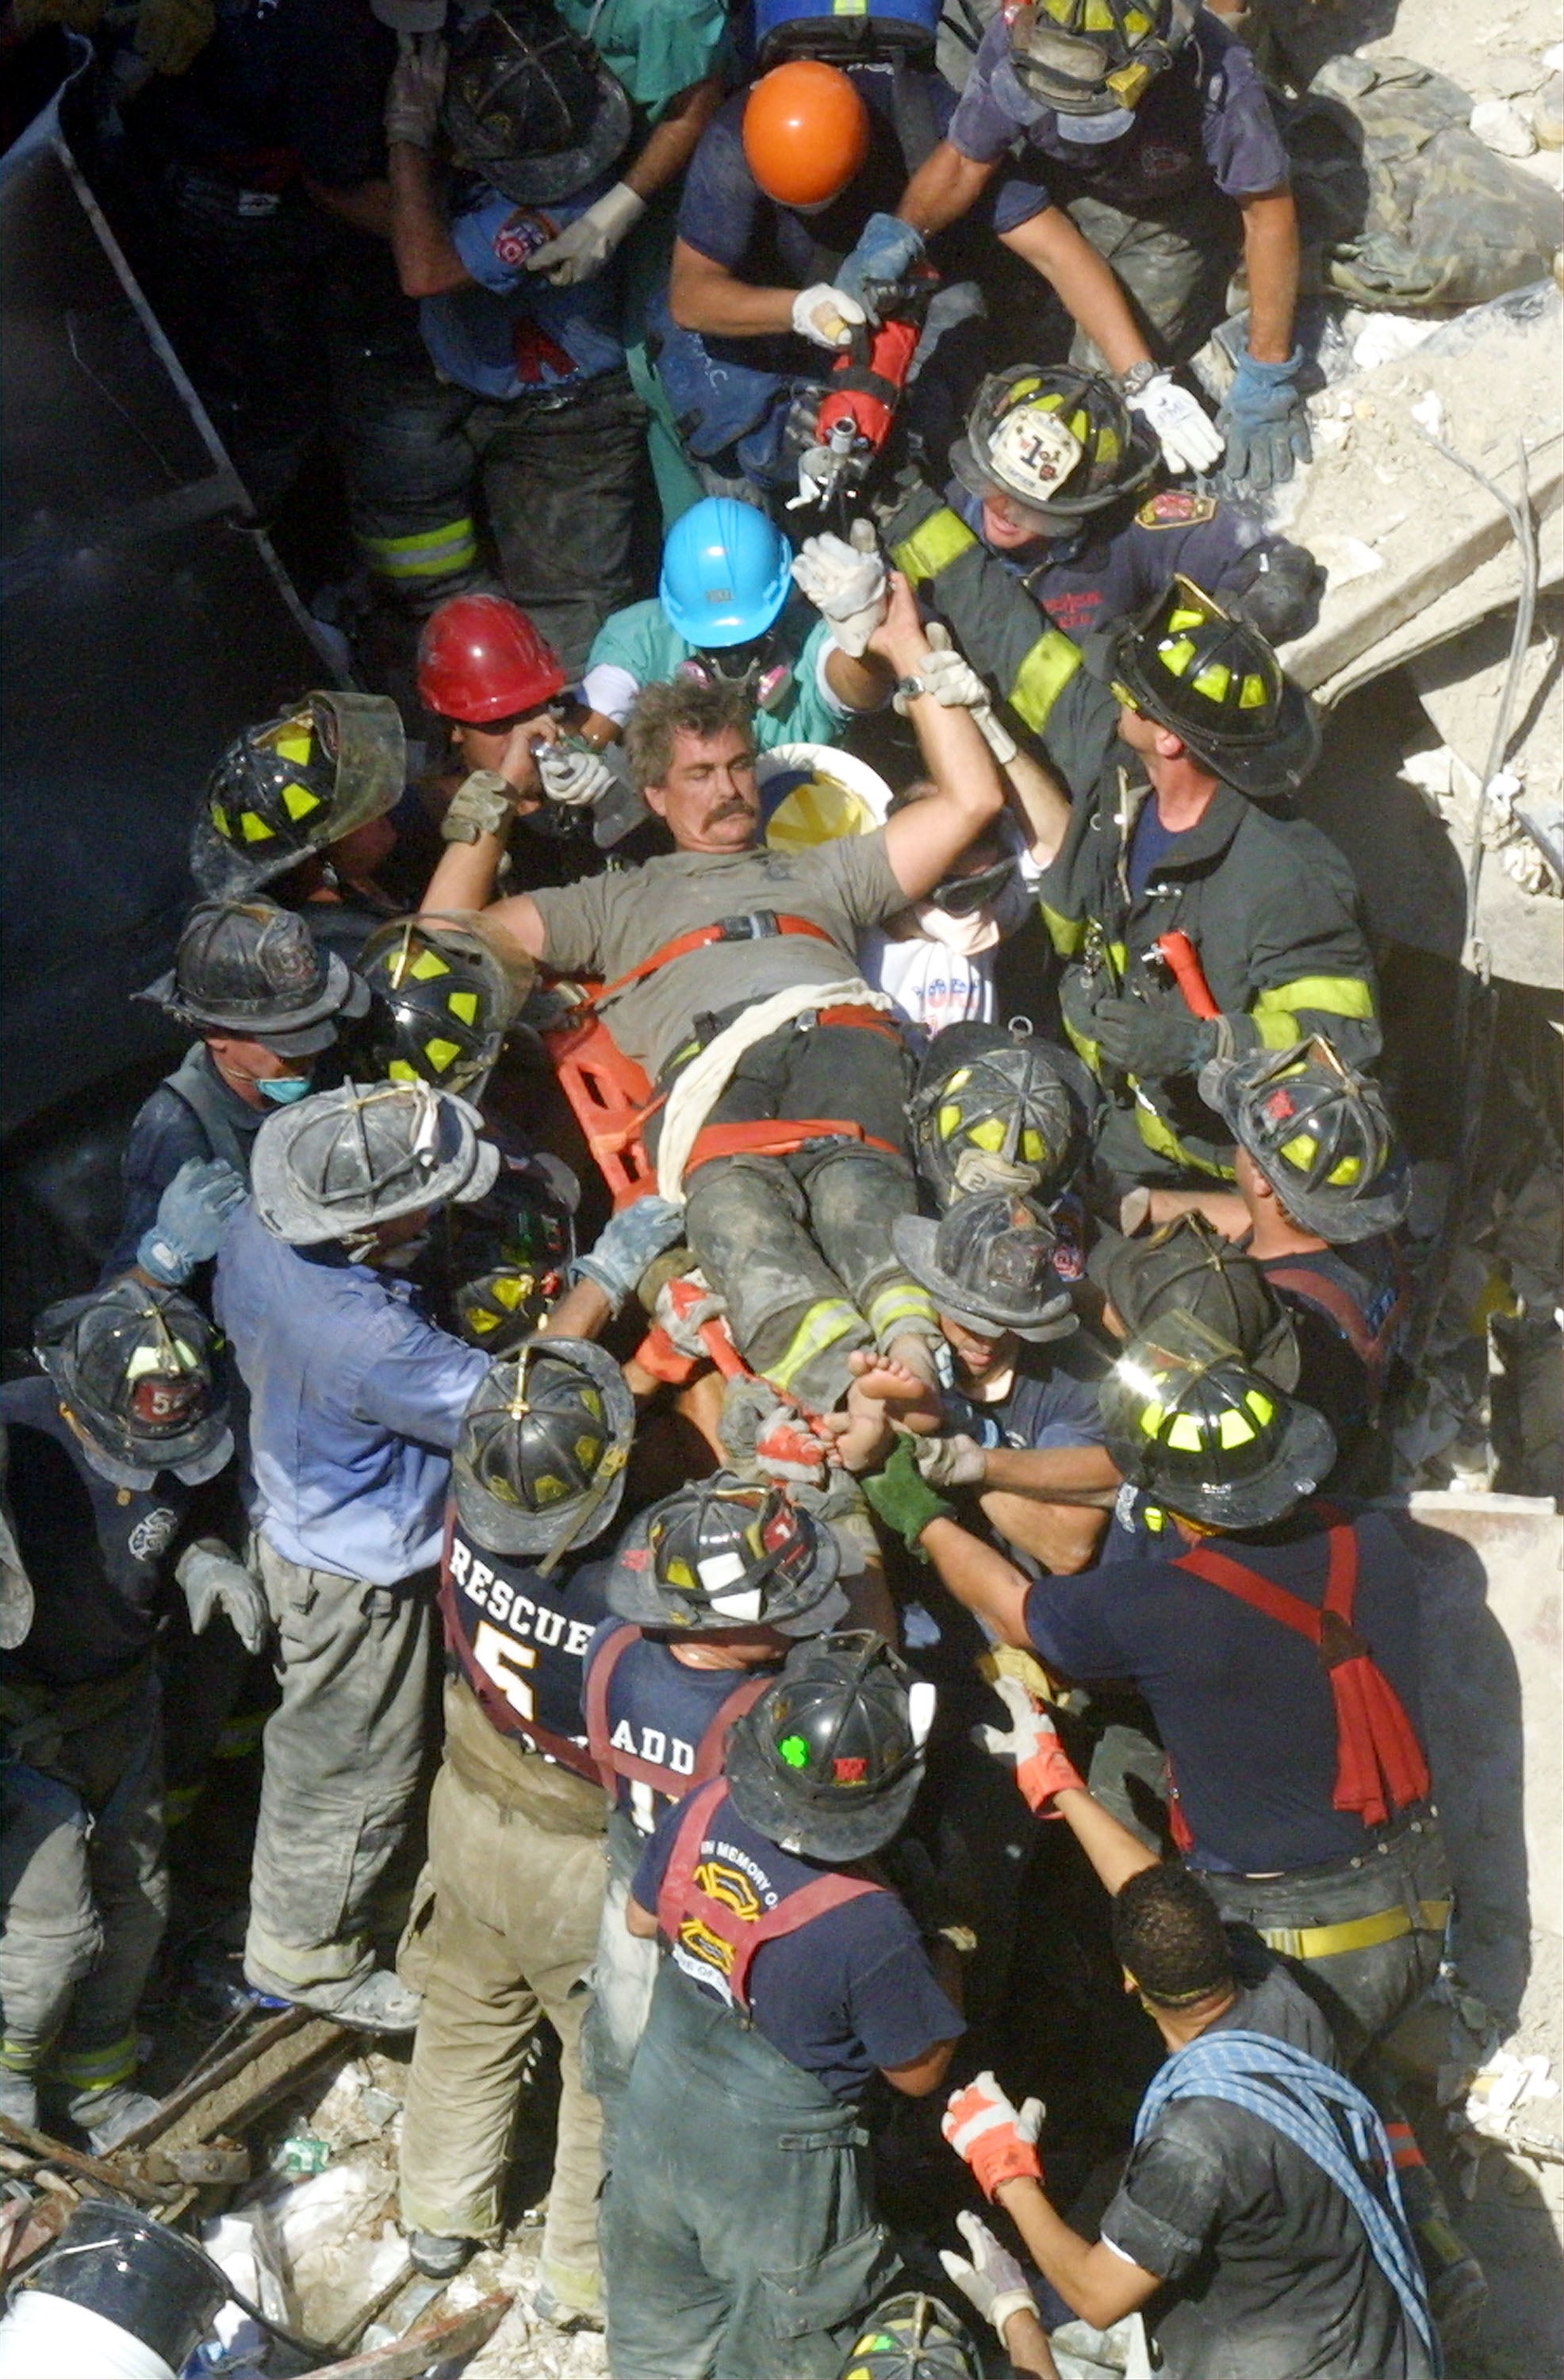 A rescue worker is pulled from the rubble